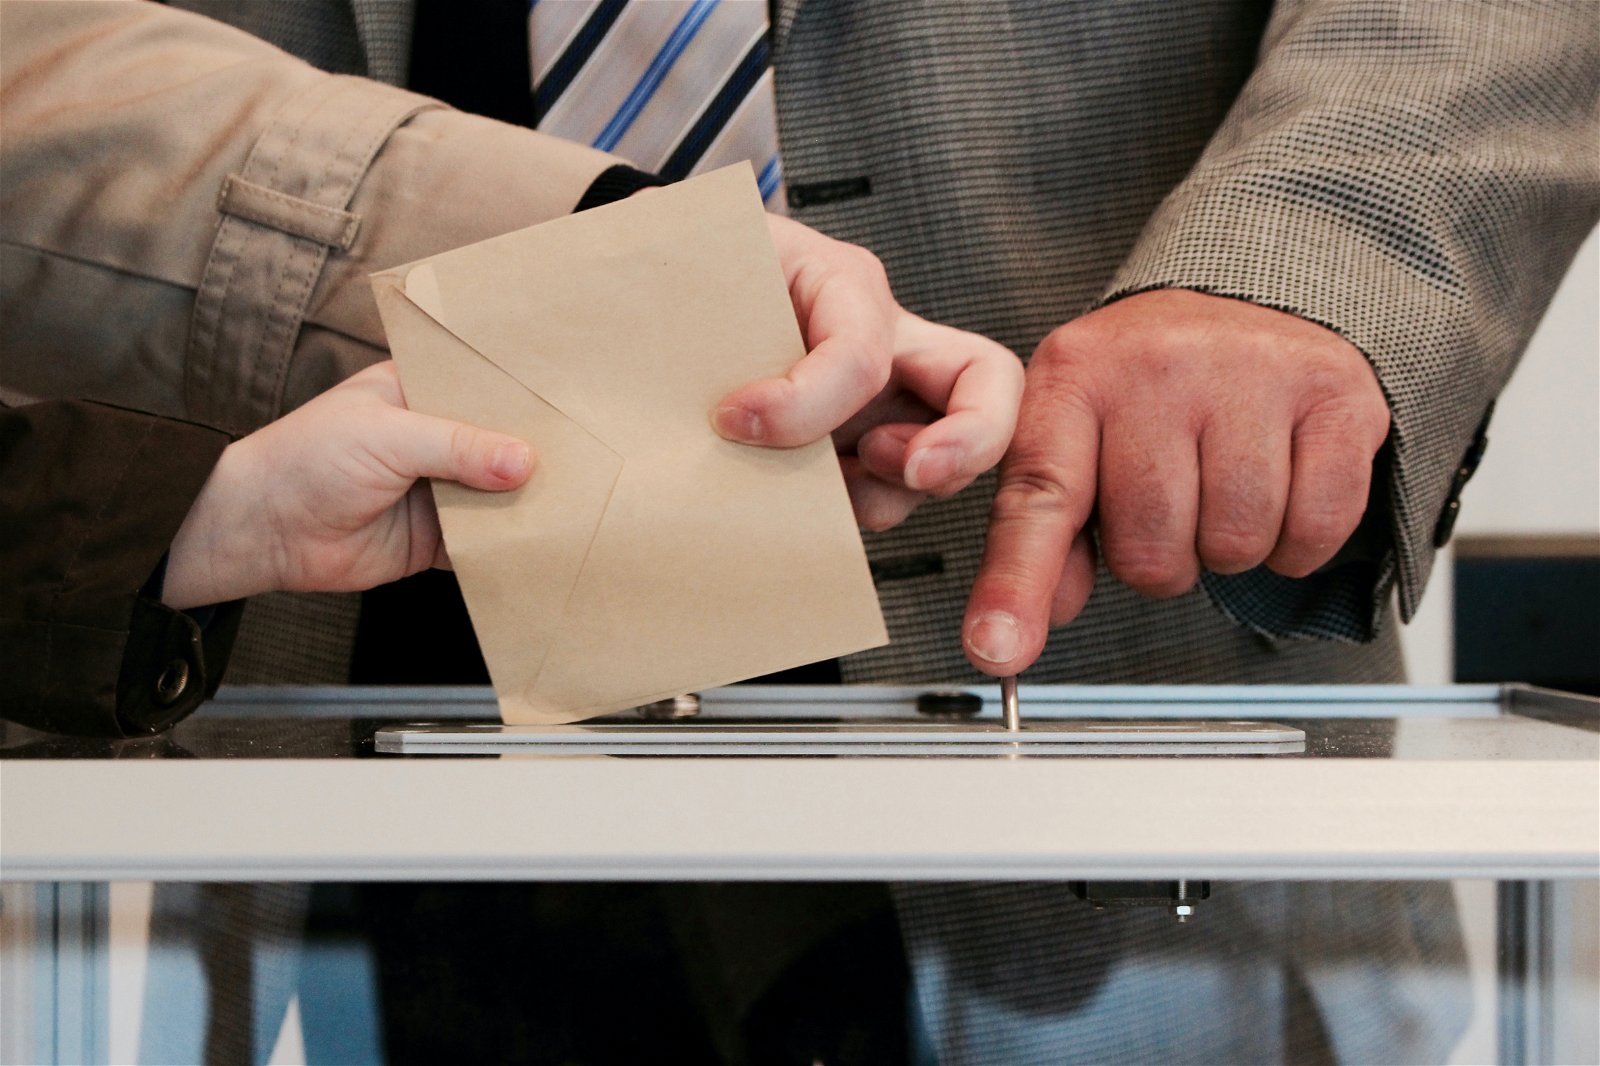 Image of a vote being cast